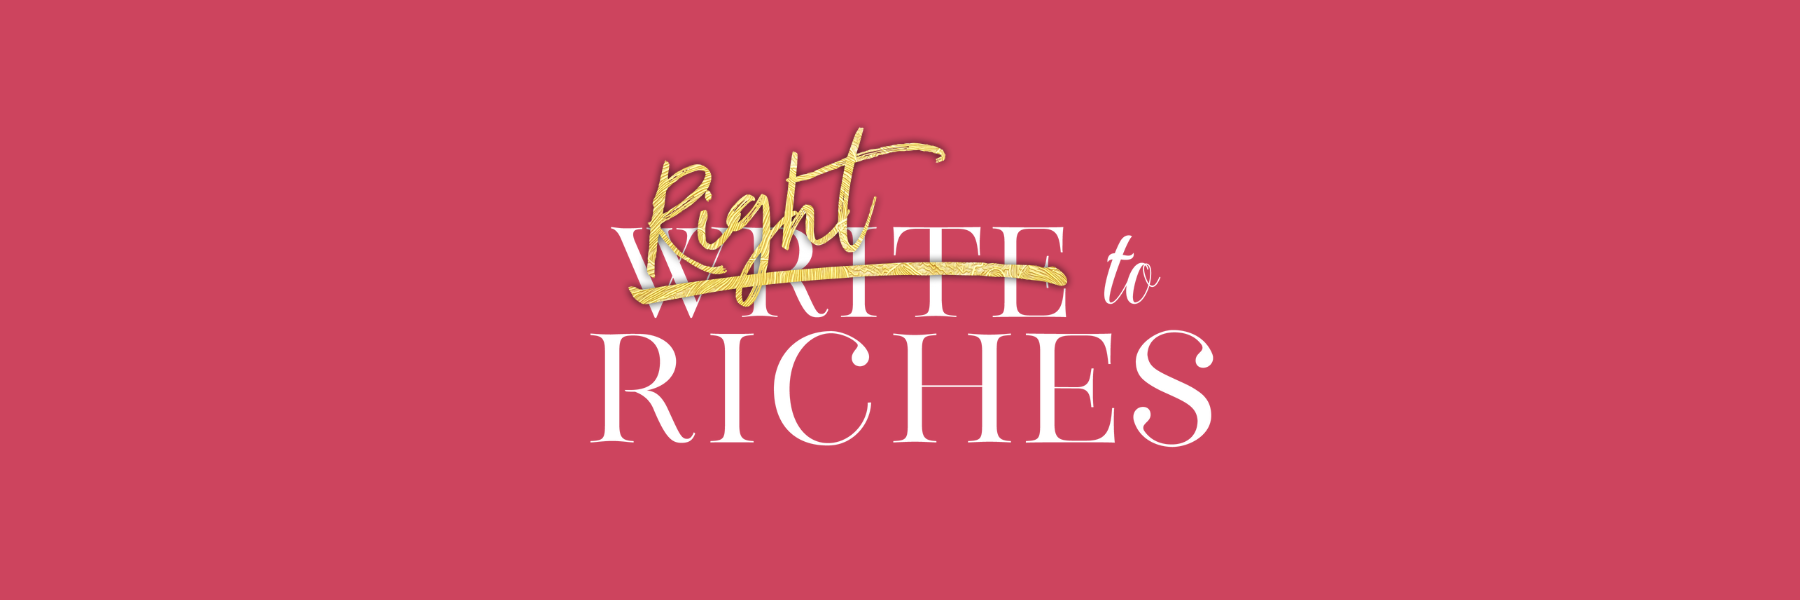 Write to Riches Banner 